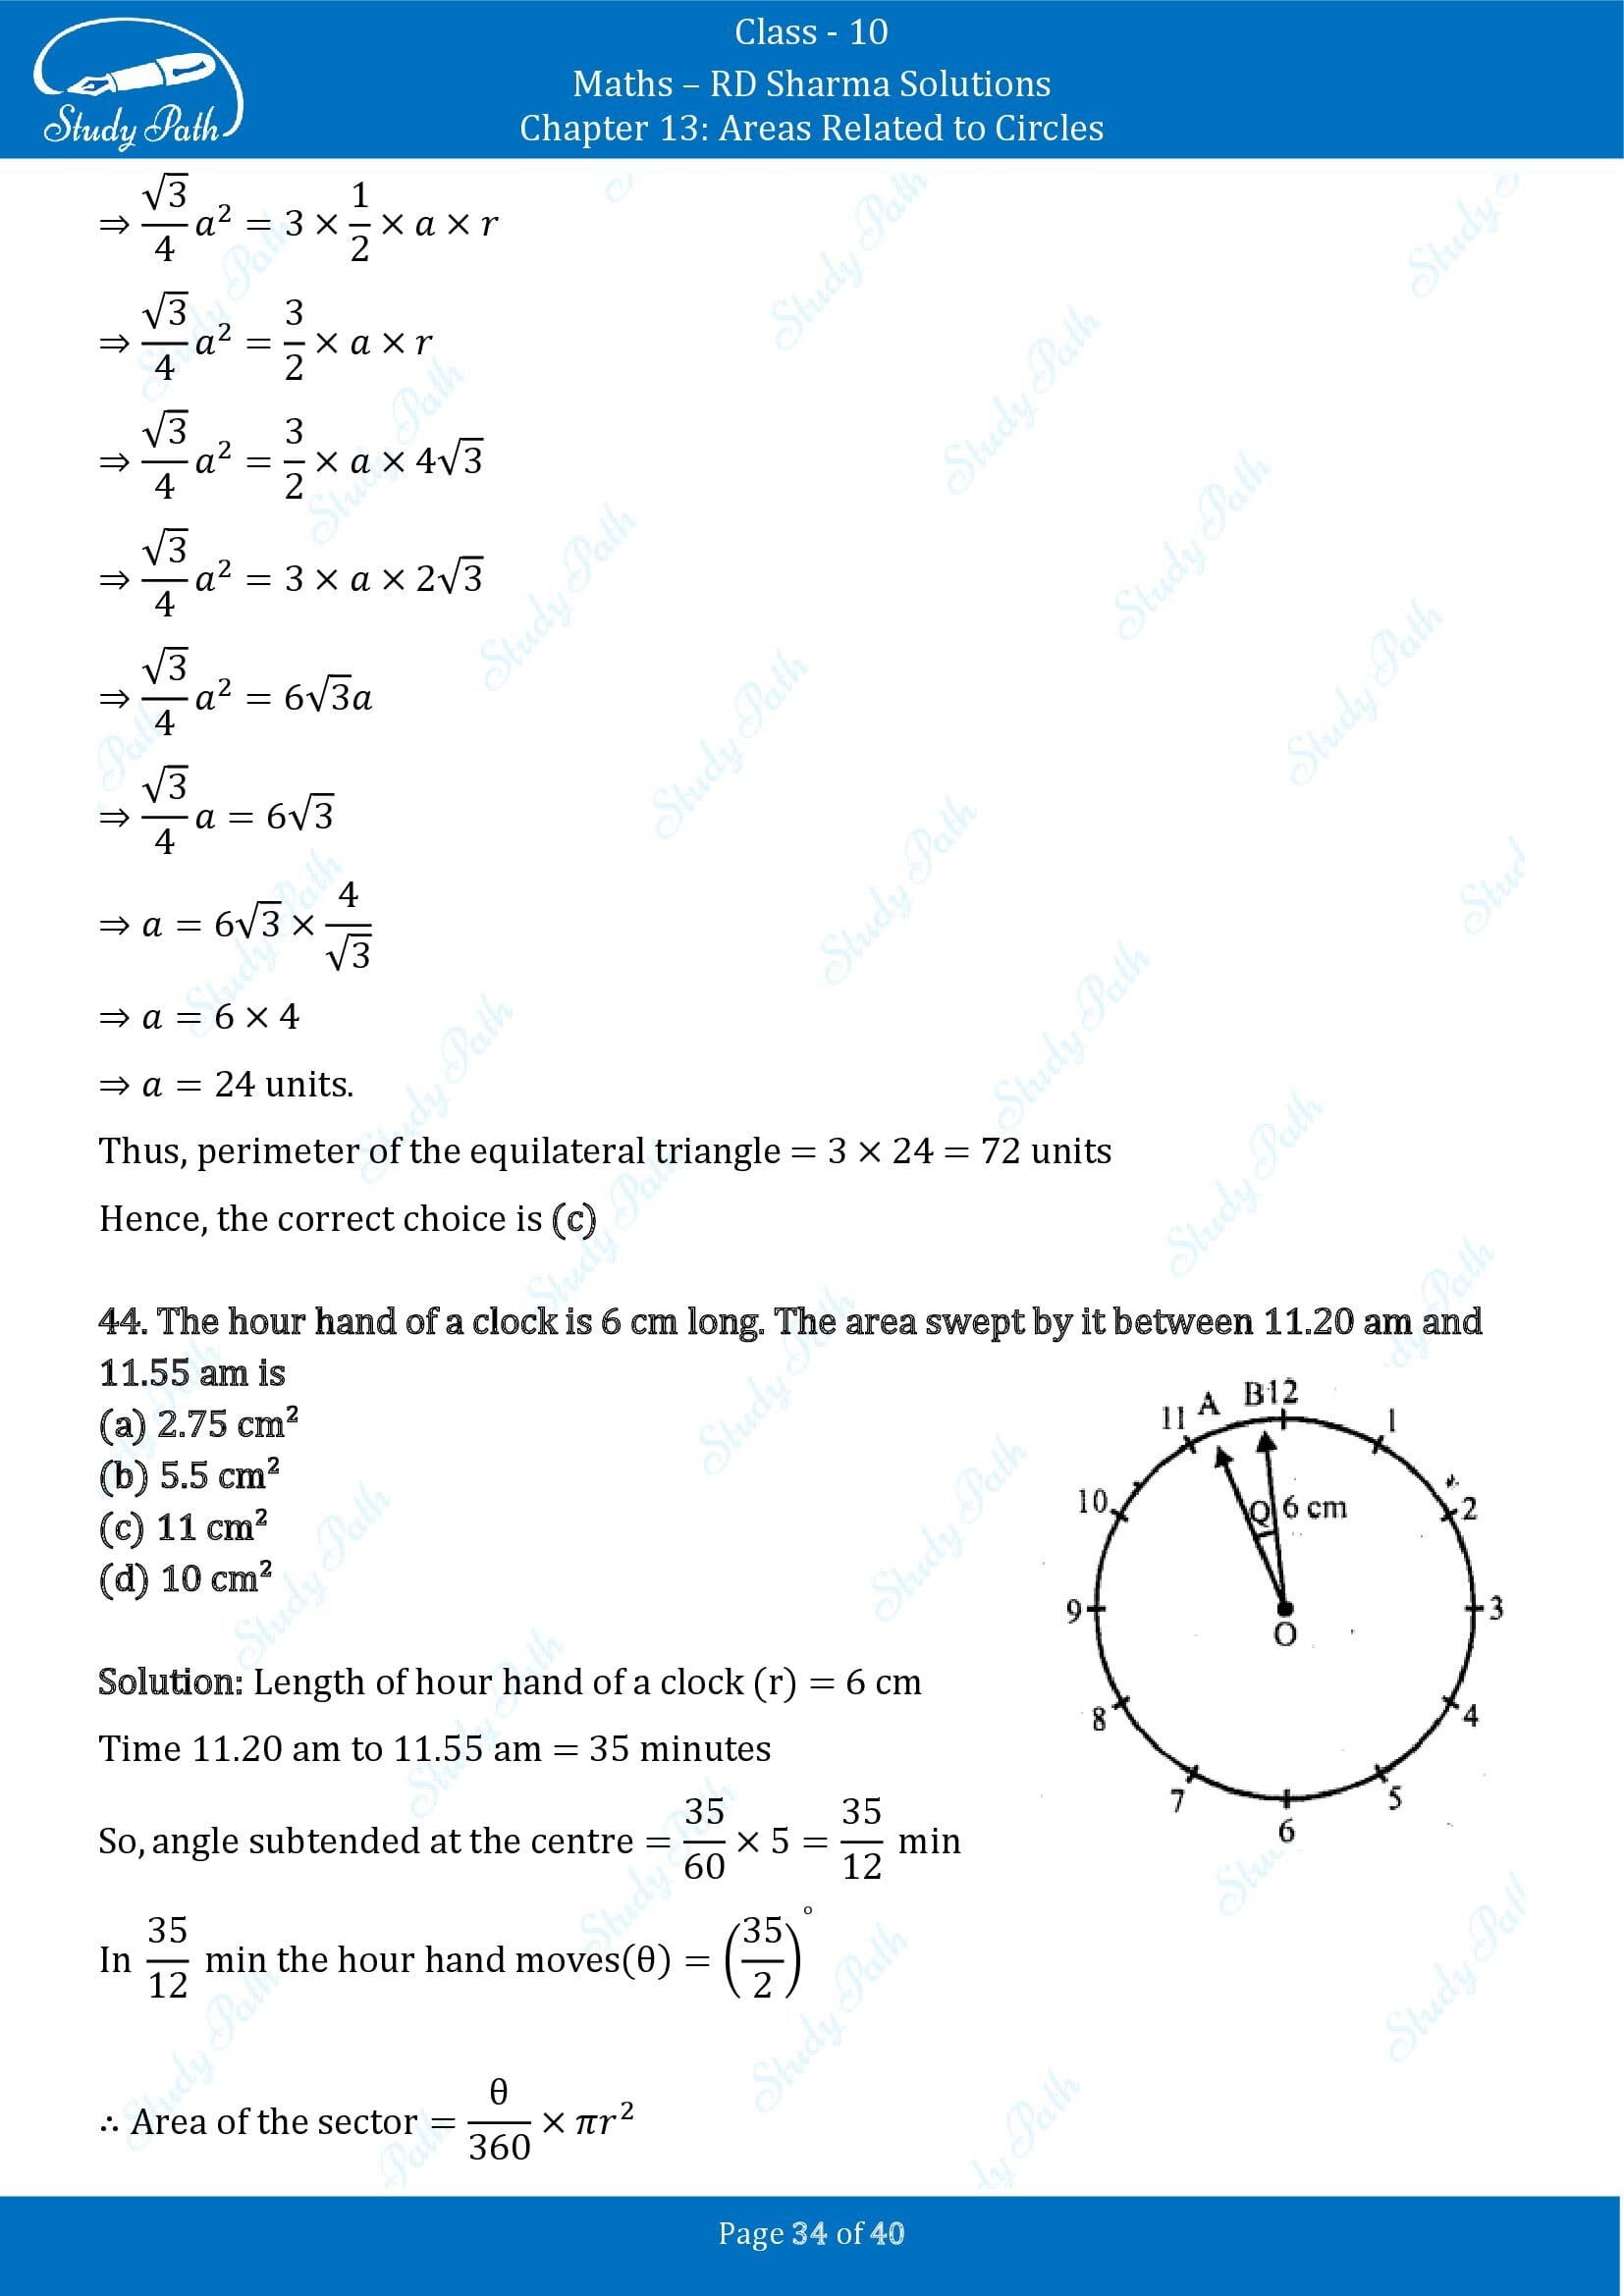 RD Sharma Solutions Class 10 Chapter 13 Areas Related to Circles Multiple Choice Question MCQs 00034